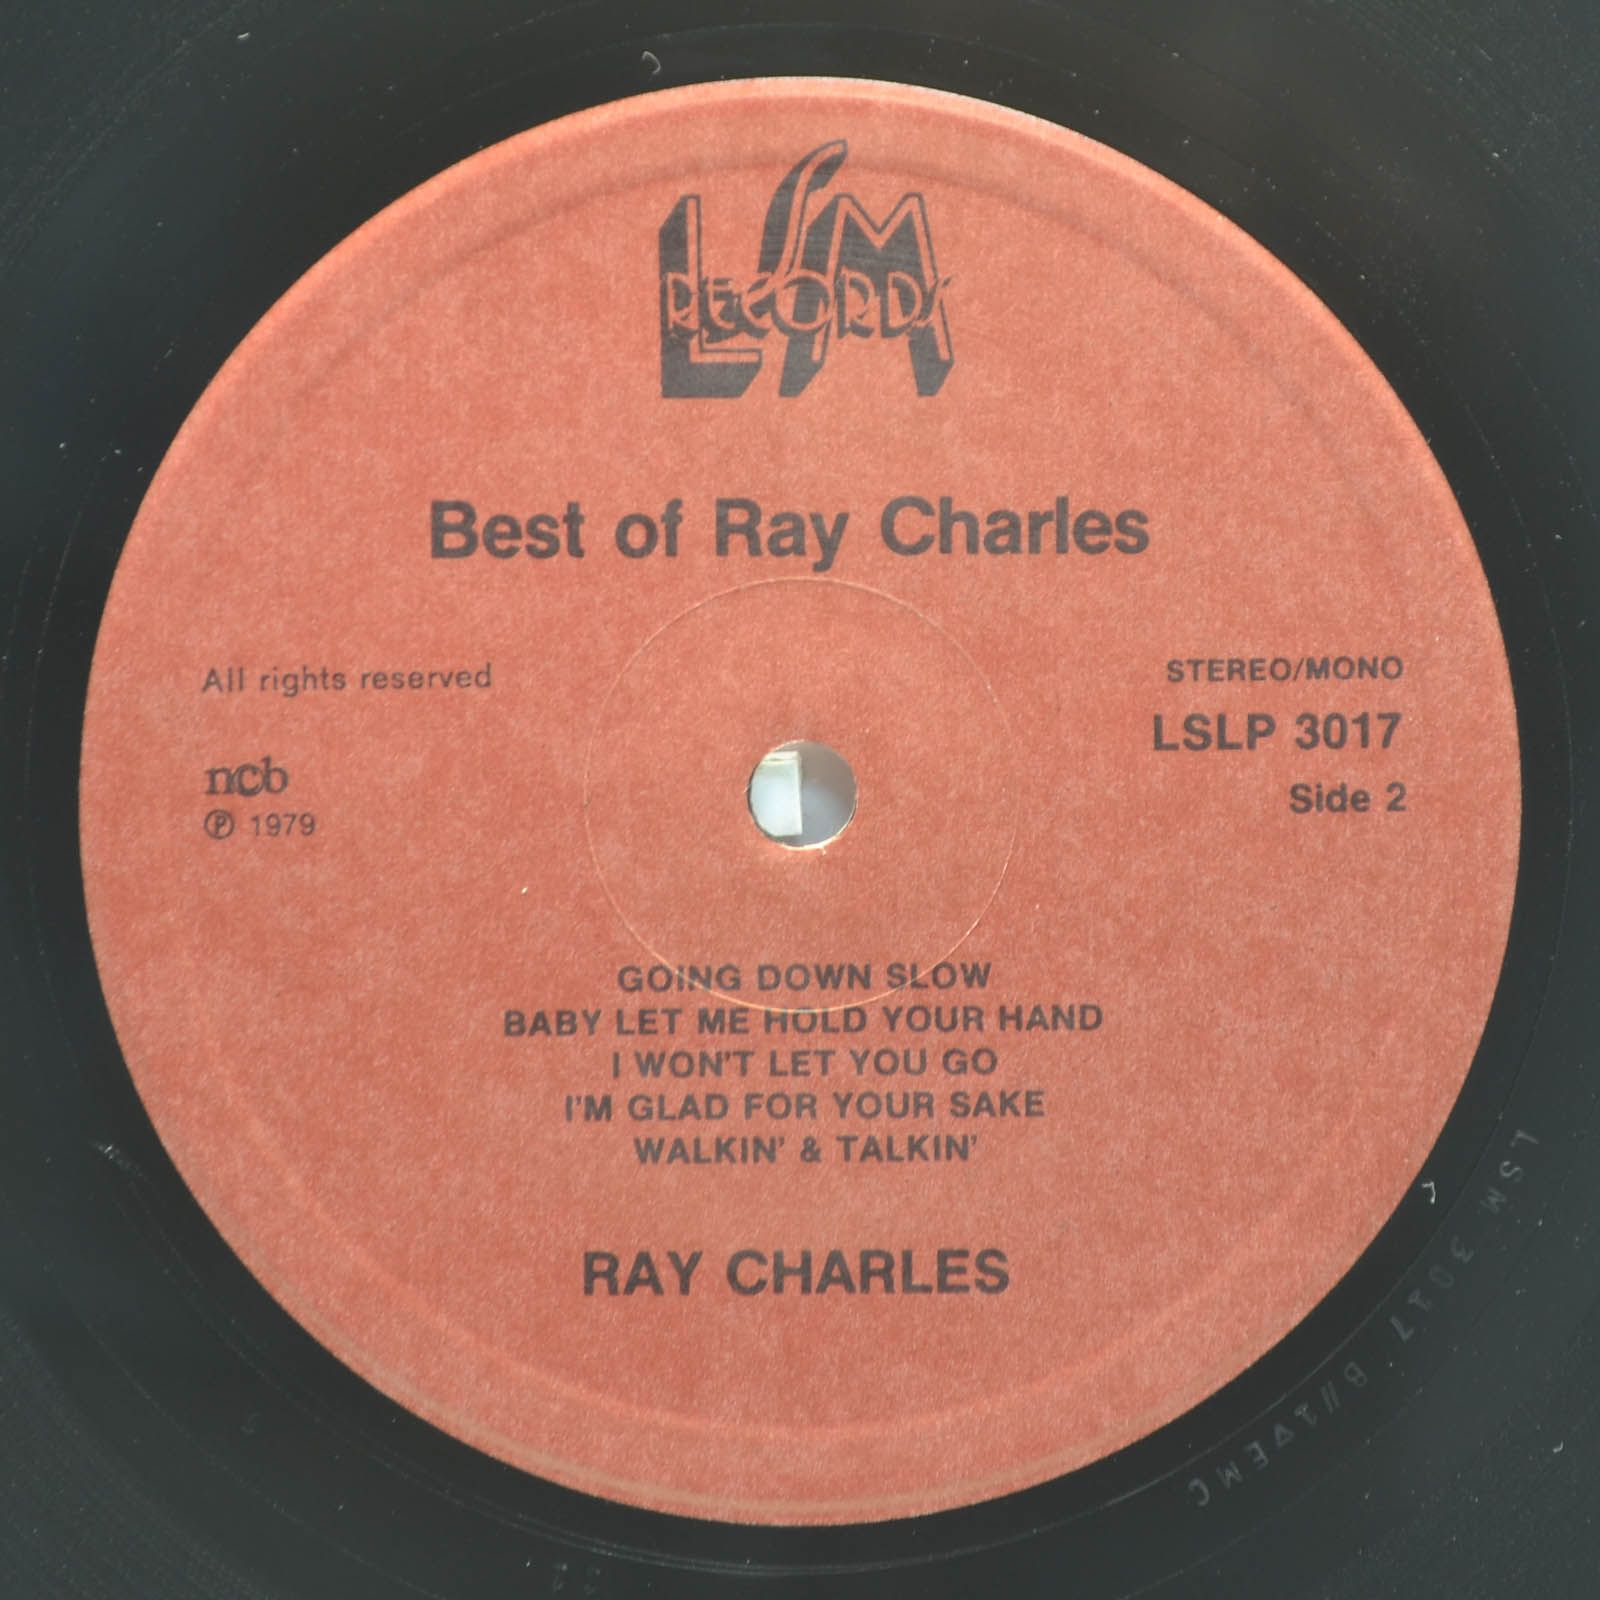 Ray Charles — Best Of (UK), 1979